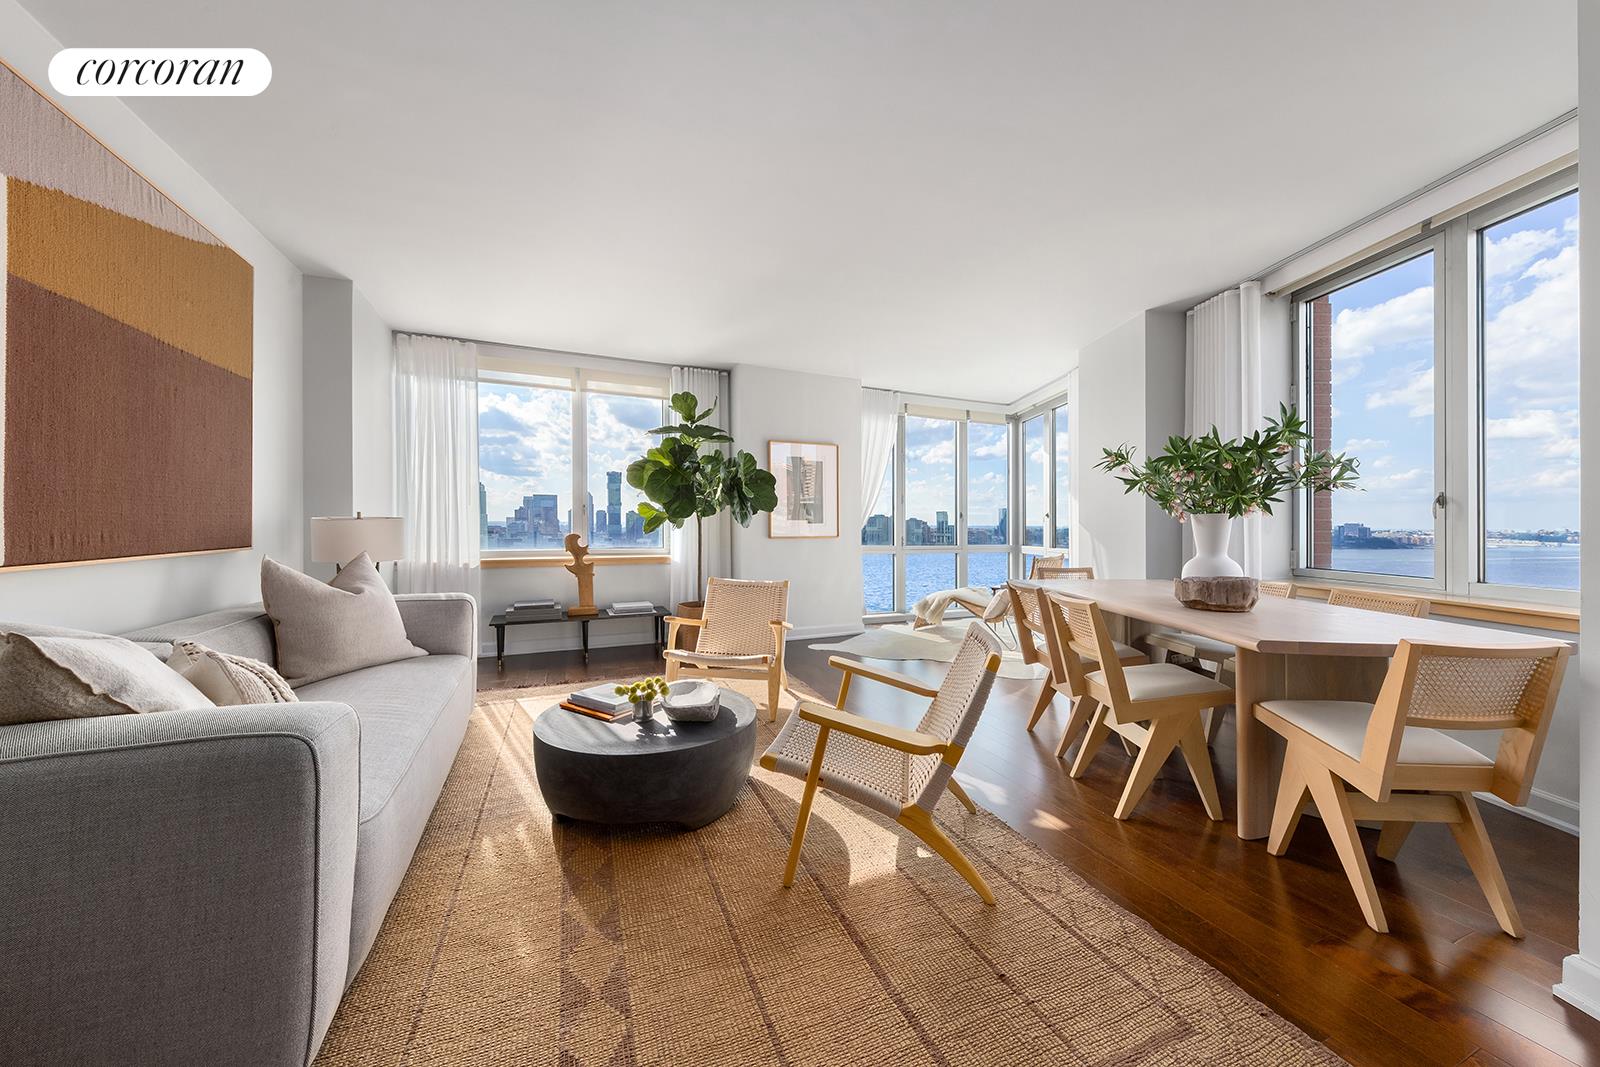 20 River Terrace 26B, Battery Park City, Downtown, NYC - 3 Bedrooms  
3 Bathrooms  
6 Rooms - 